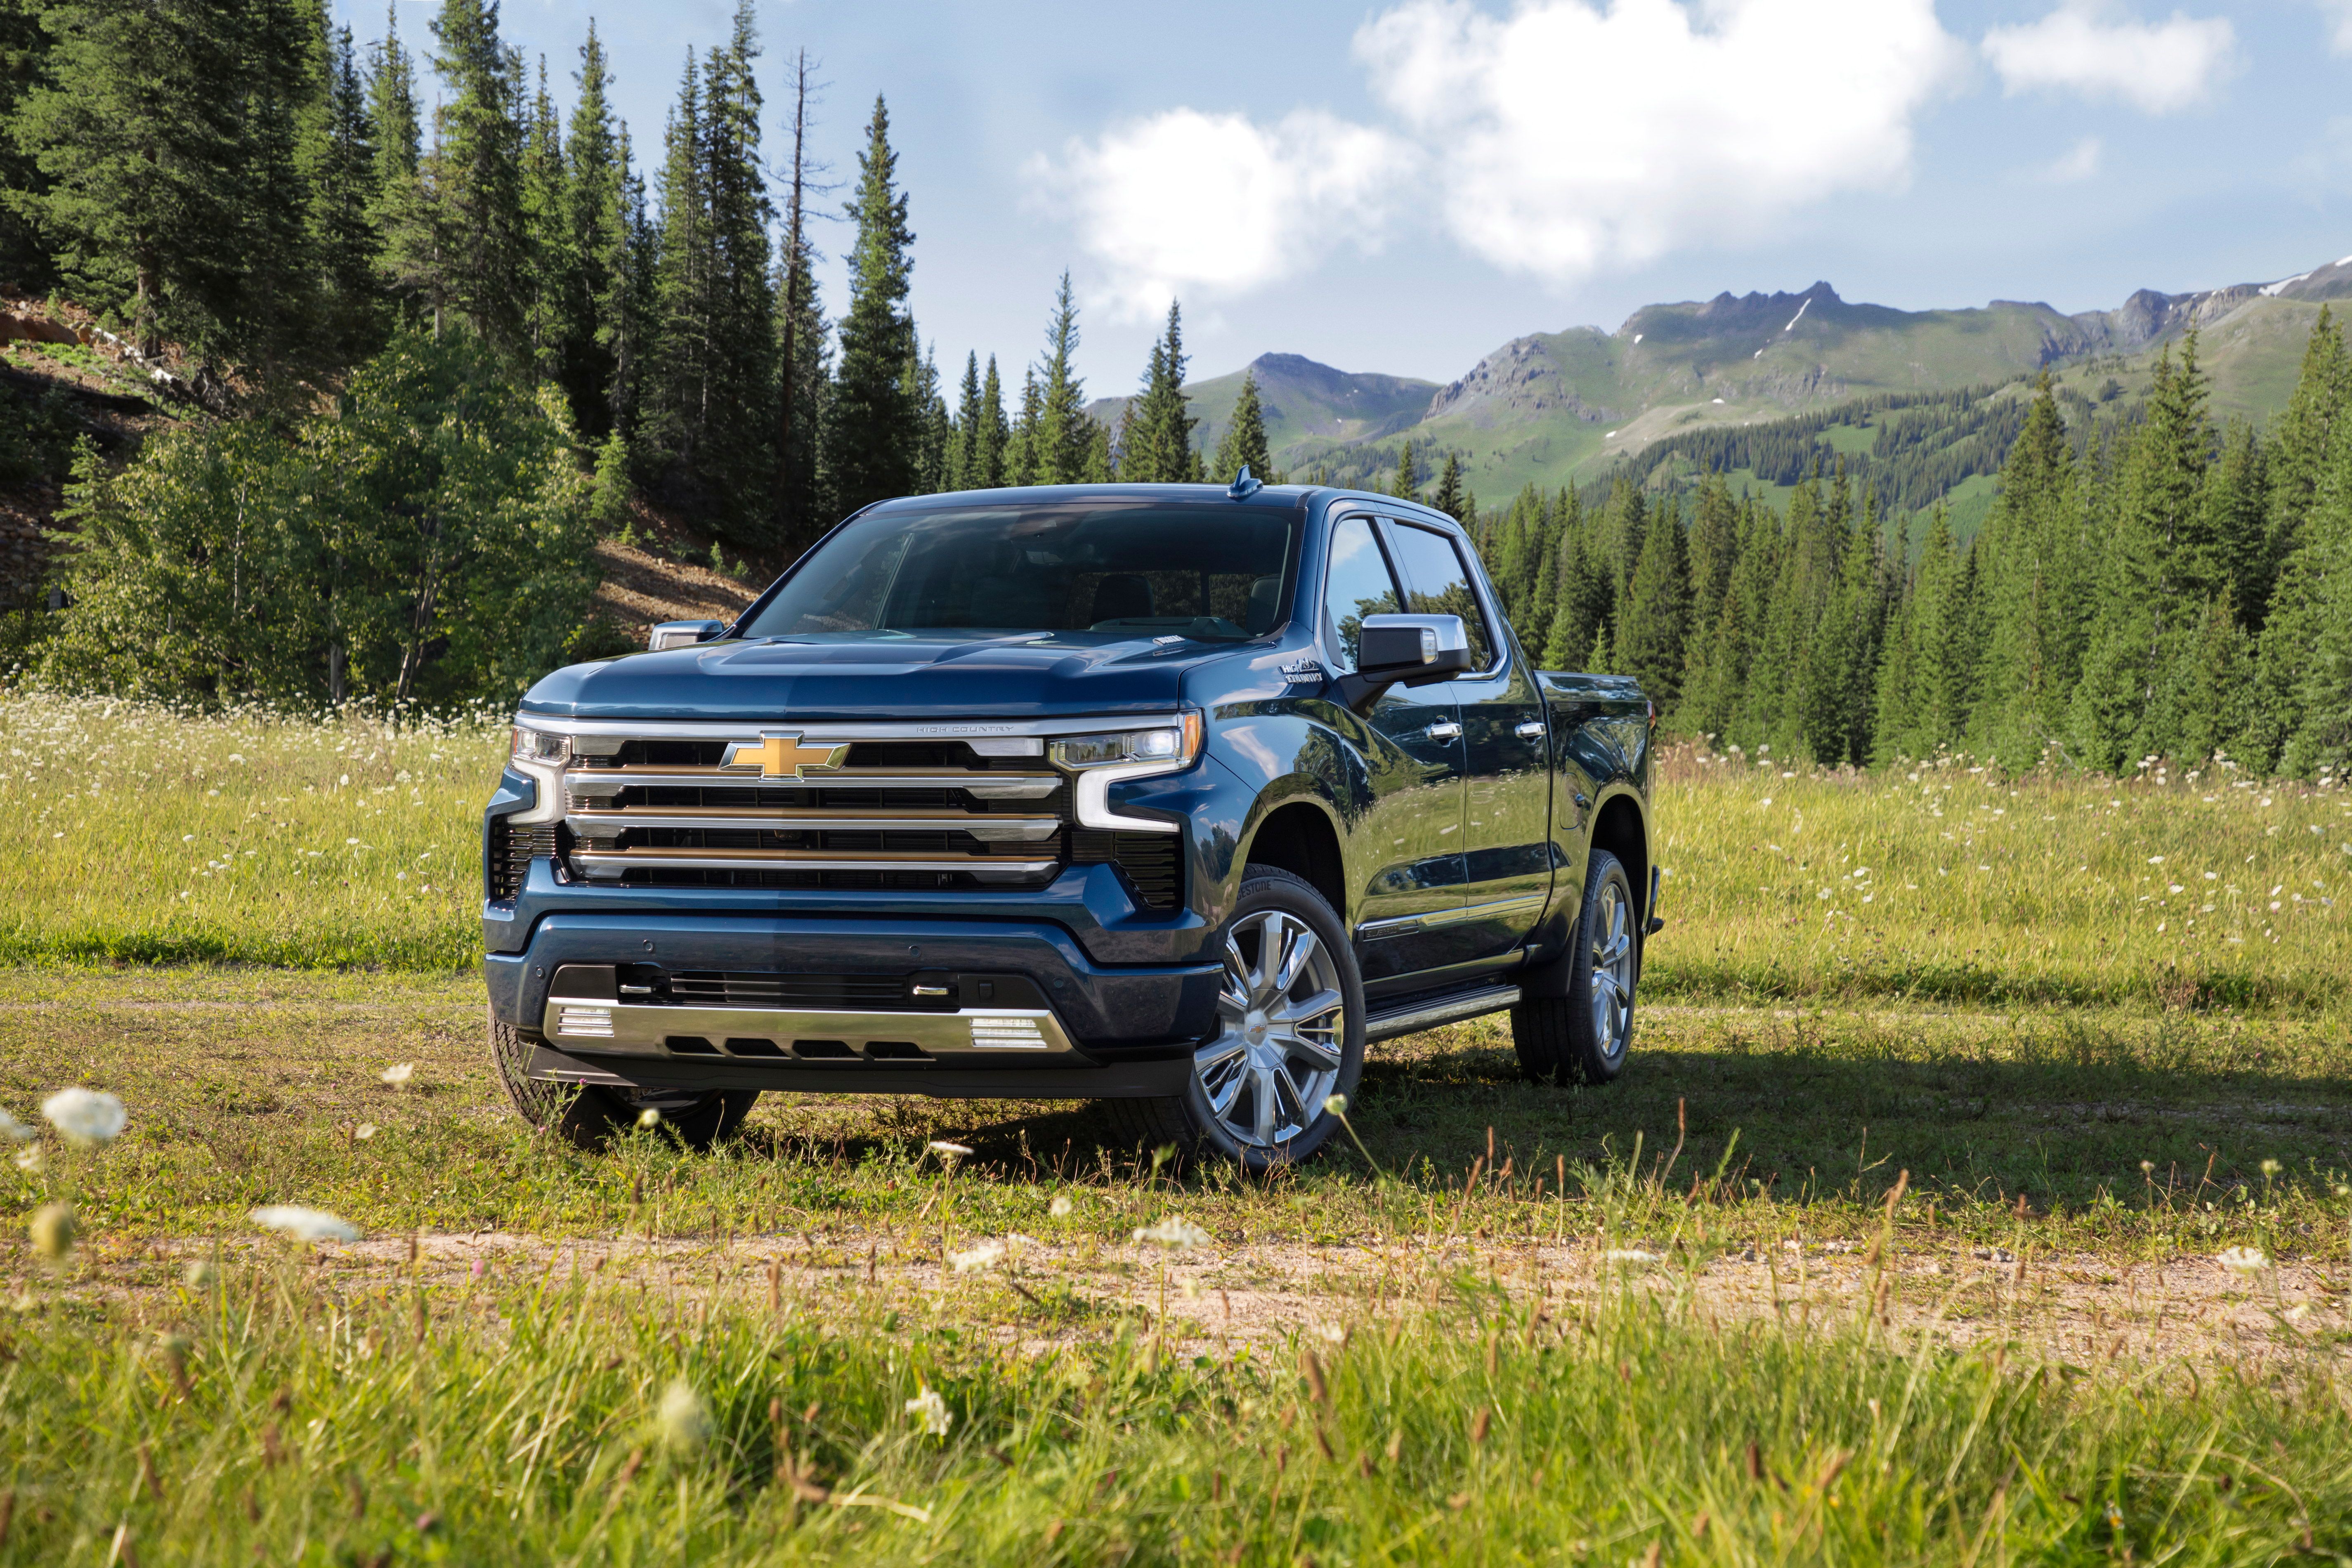 Blue 2022 Chevy Silverado Parked In The Countryside